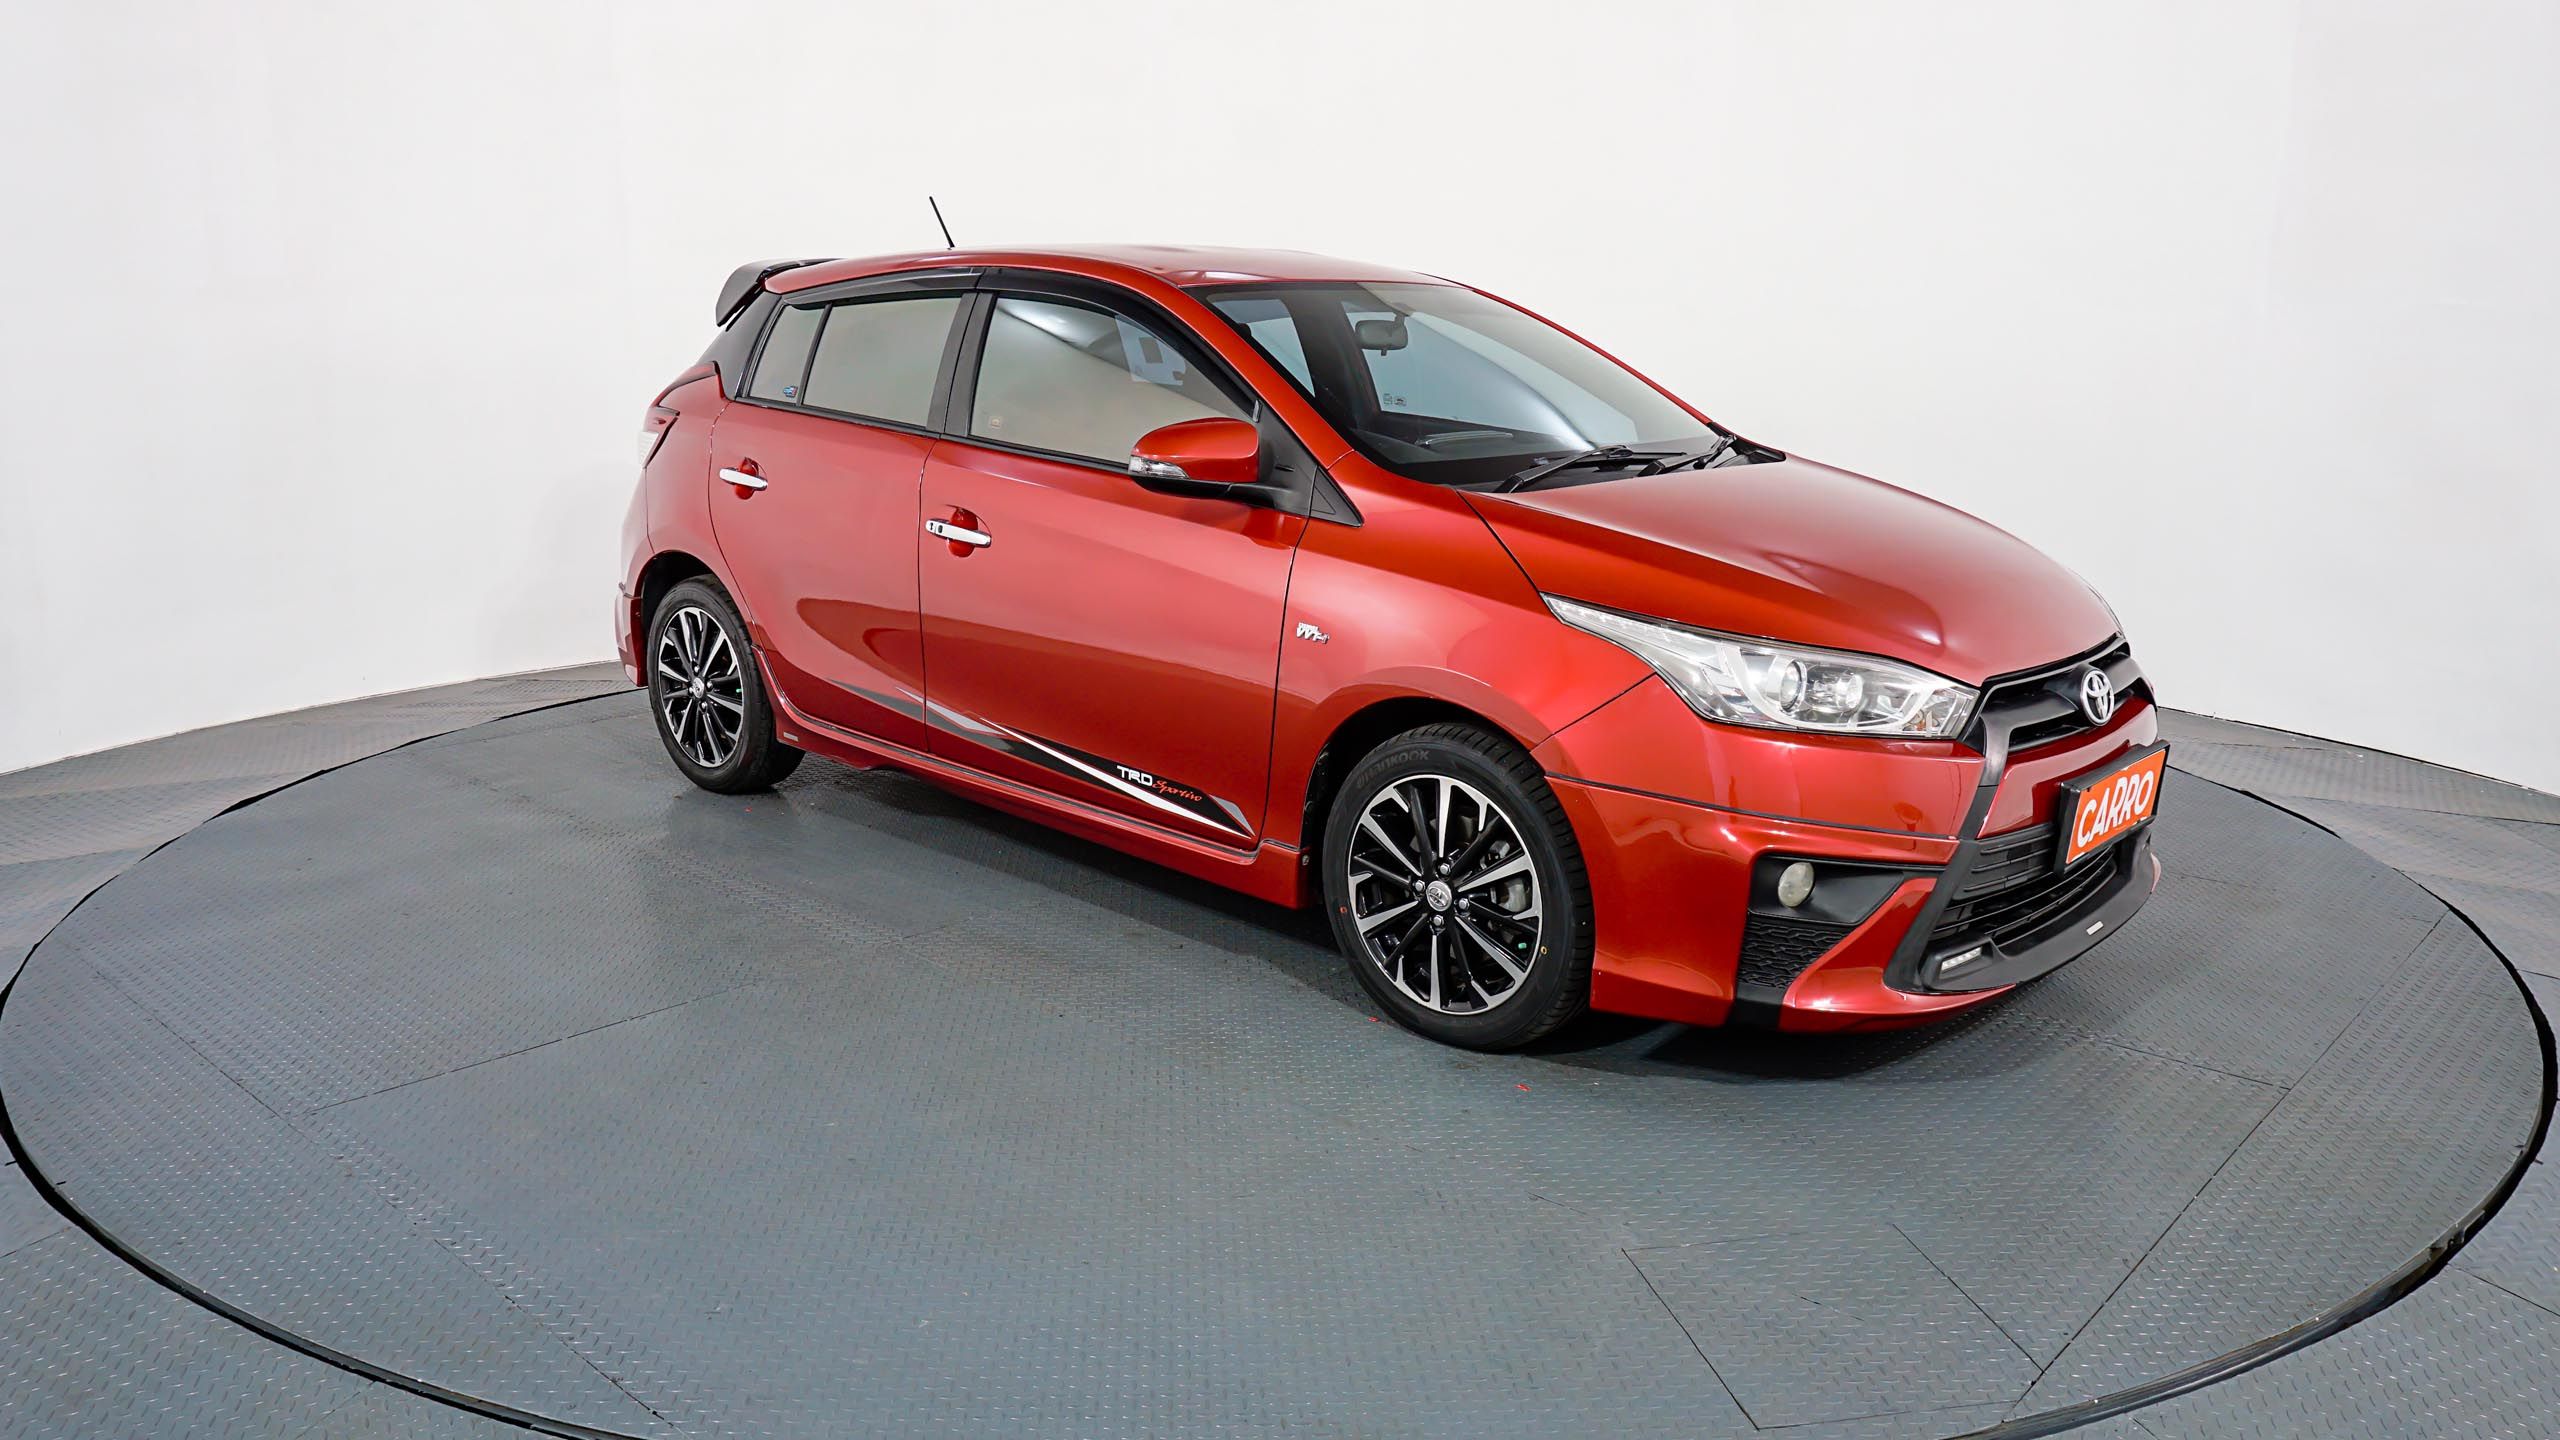 Used 2017 Toyota Yaris S TRD Sportivo 1.5L AT S TRD Sportivo 1.5L AT